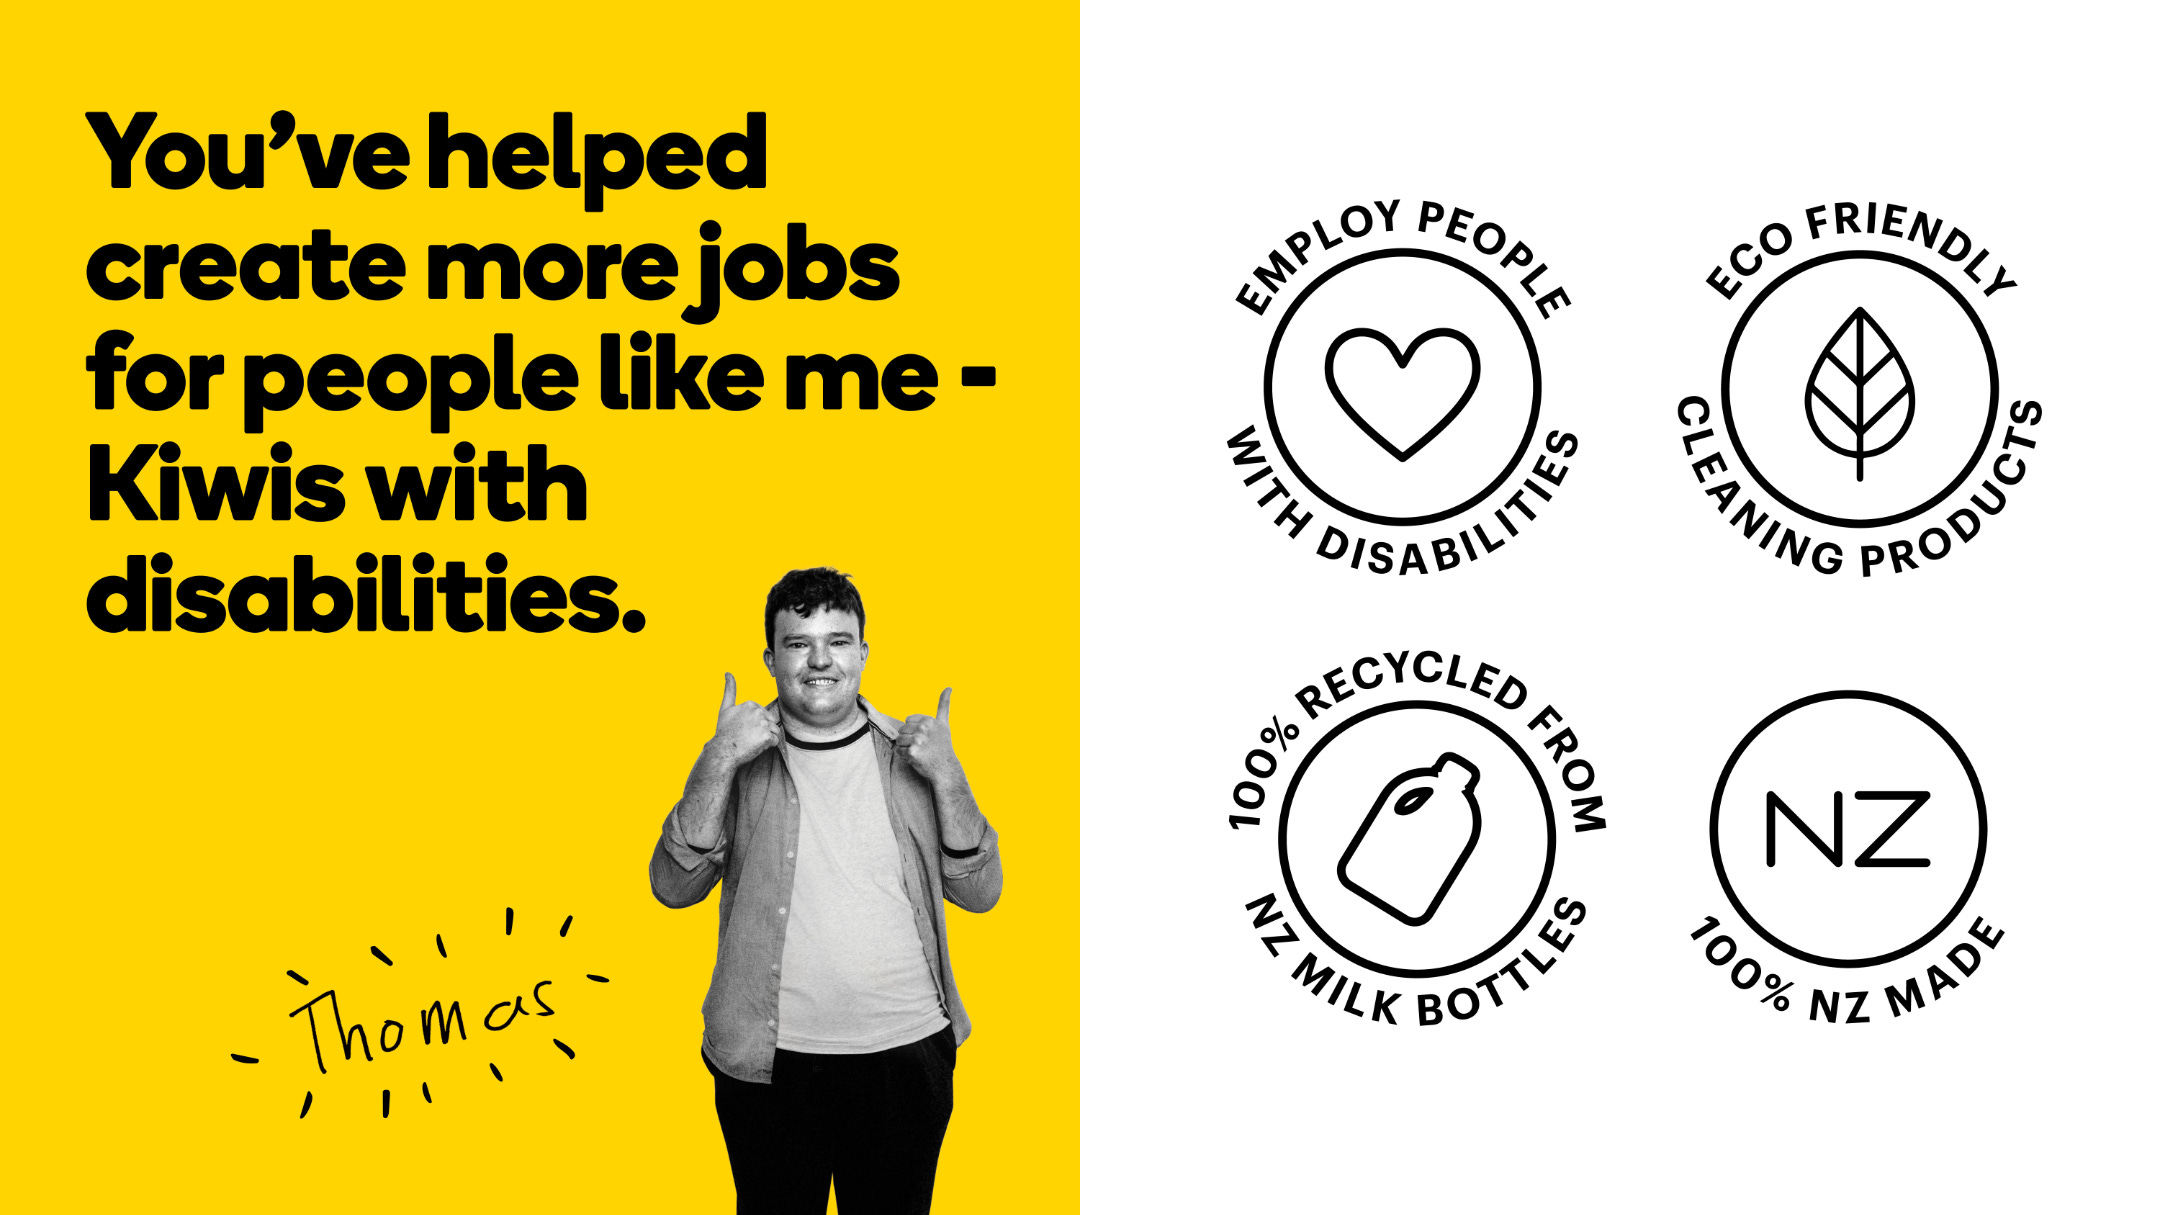 Advertisement for Will & Able featuring a black-and-white portrait of an employee named Thomas and. The left half features a yellow background and a tagline in black; the right half features four circular illustrated labels in black on a white ground